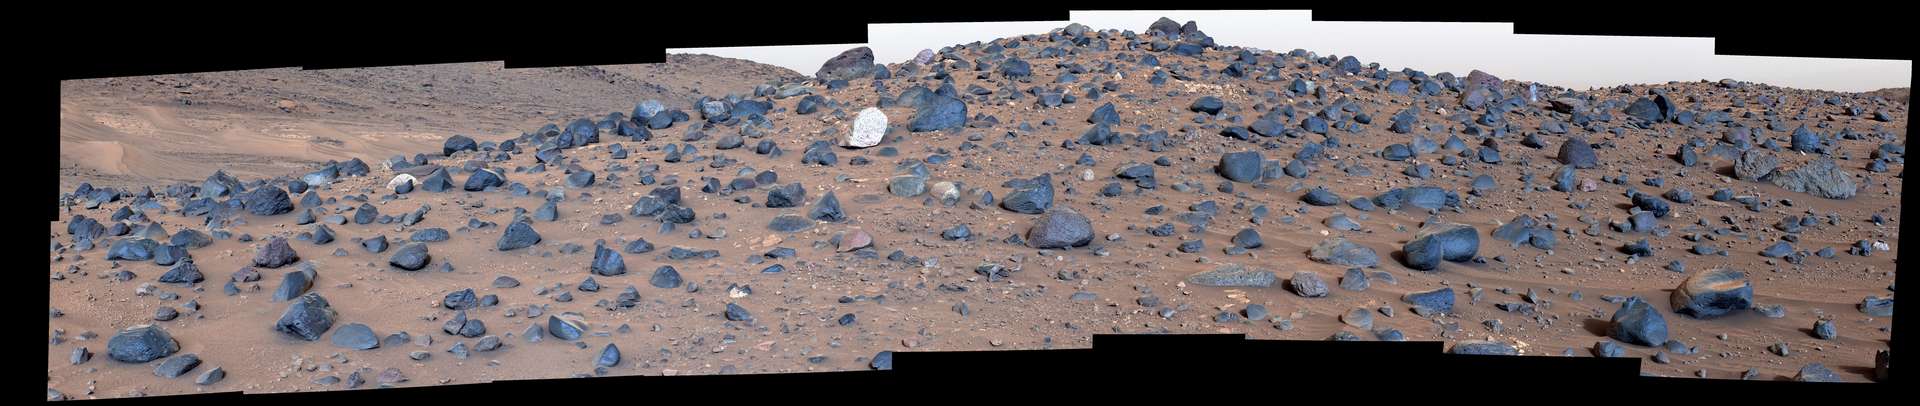 NASA's rover discovered an interesting white rock on the surface of Mars!